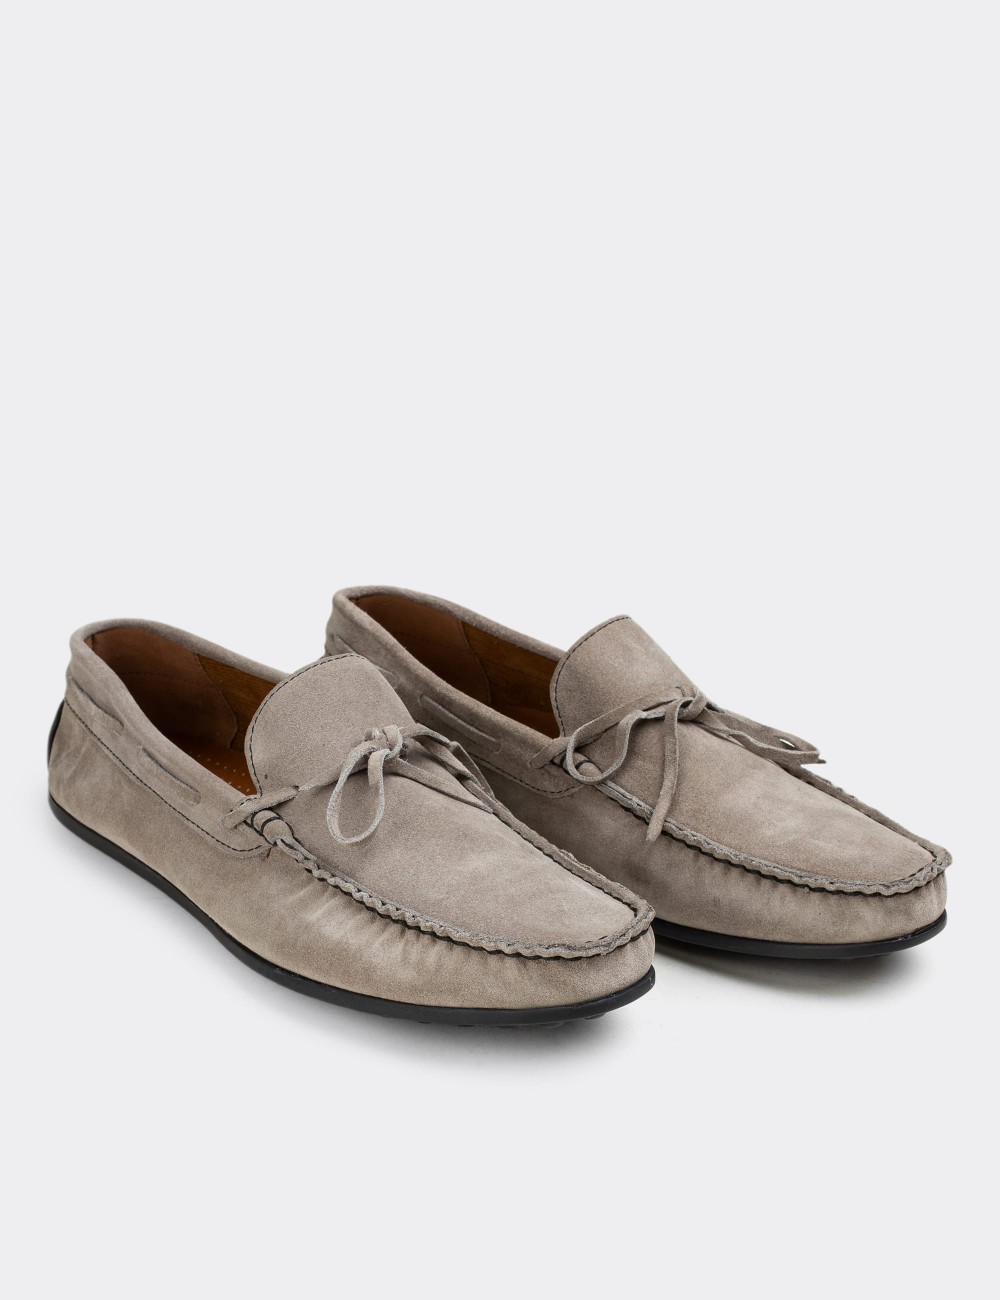 Sandstone Suede Leather Driving Shoes - 01647MVZNC01